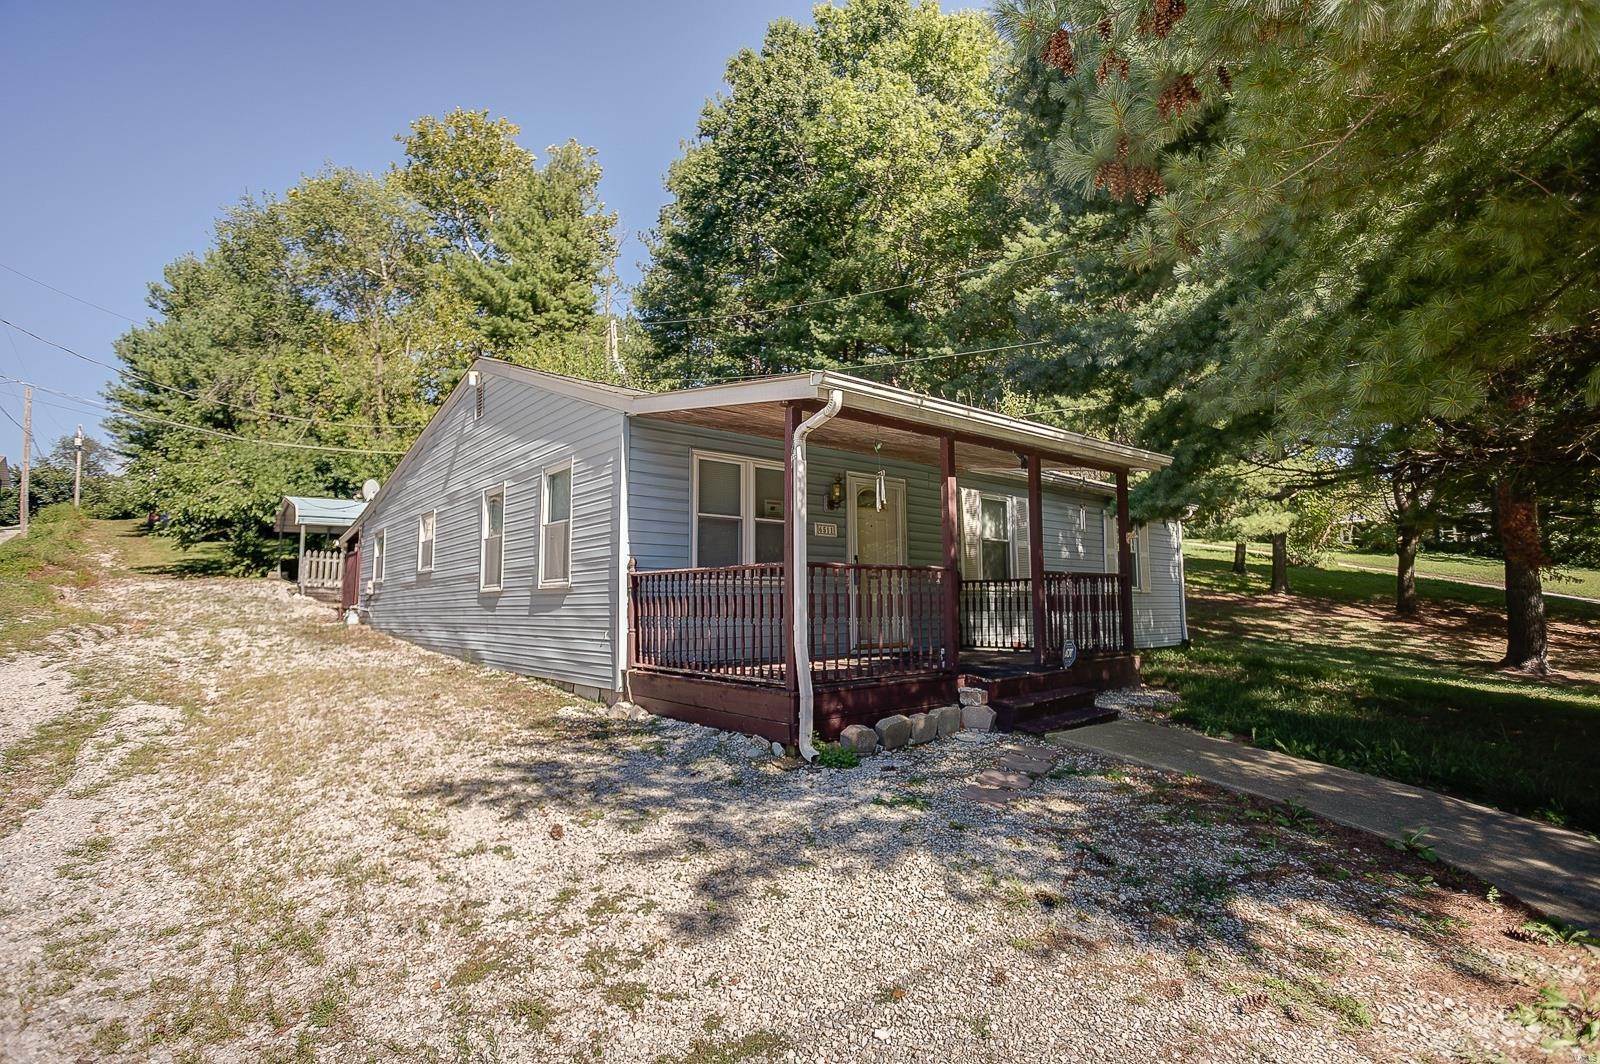 Property for Sale at 6511 Old Saint Louis Road Belleville, Illinois 62223 United States